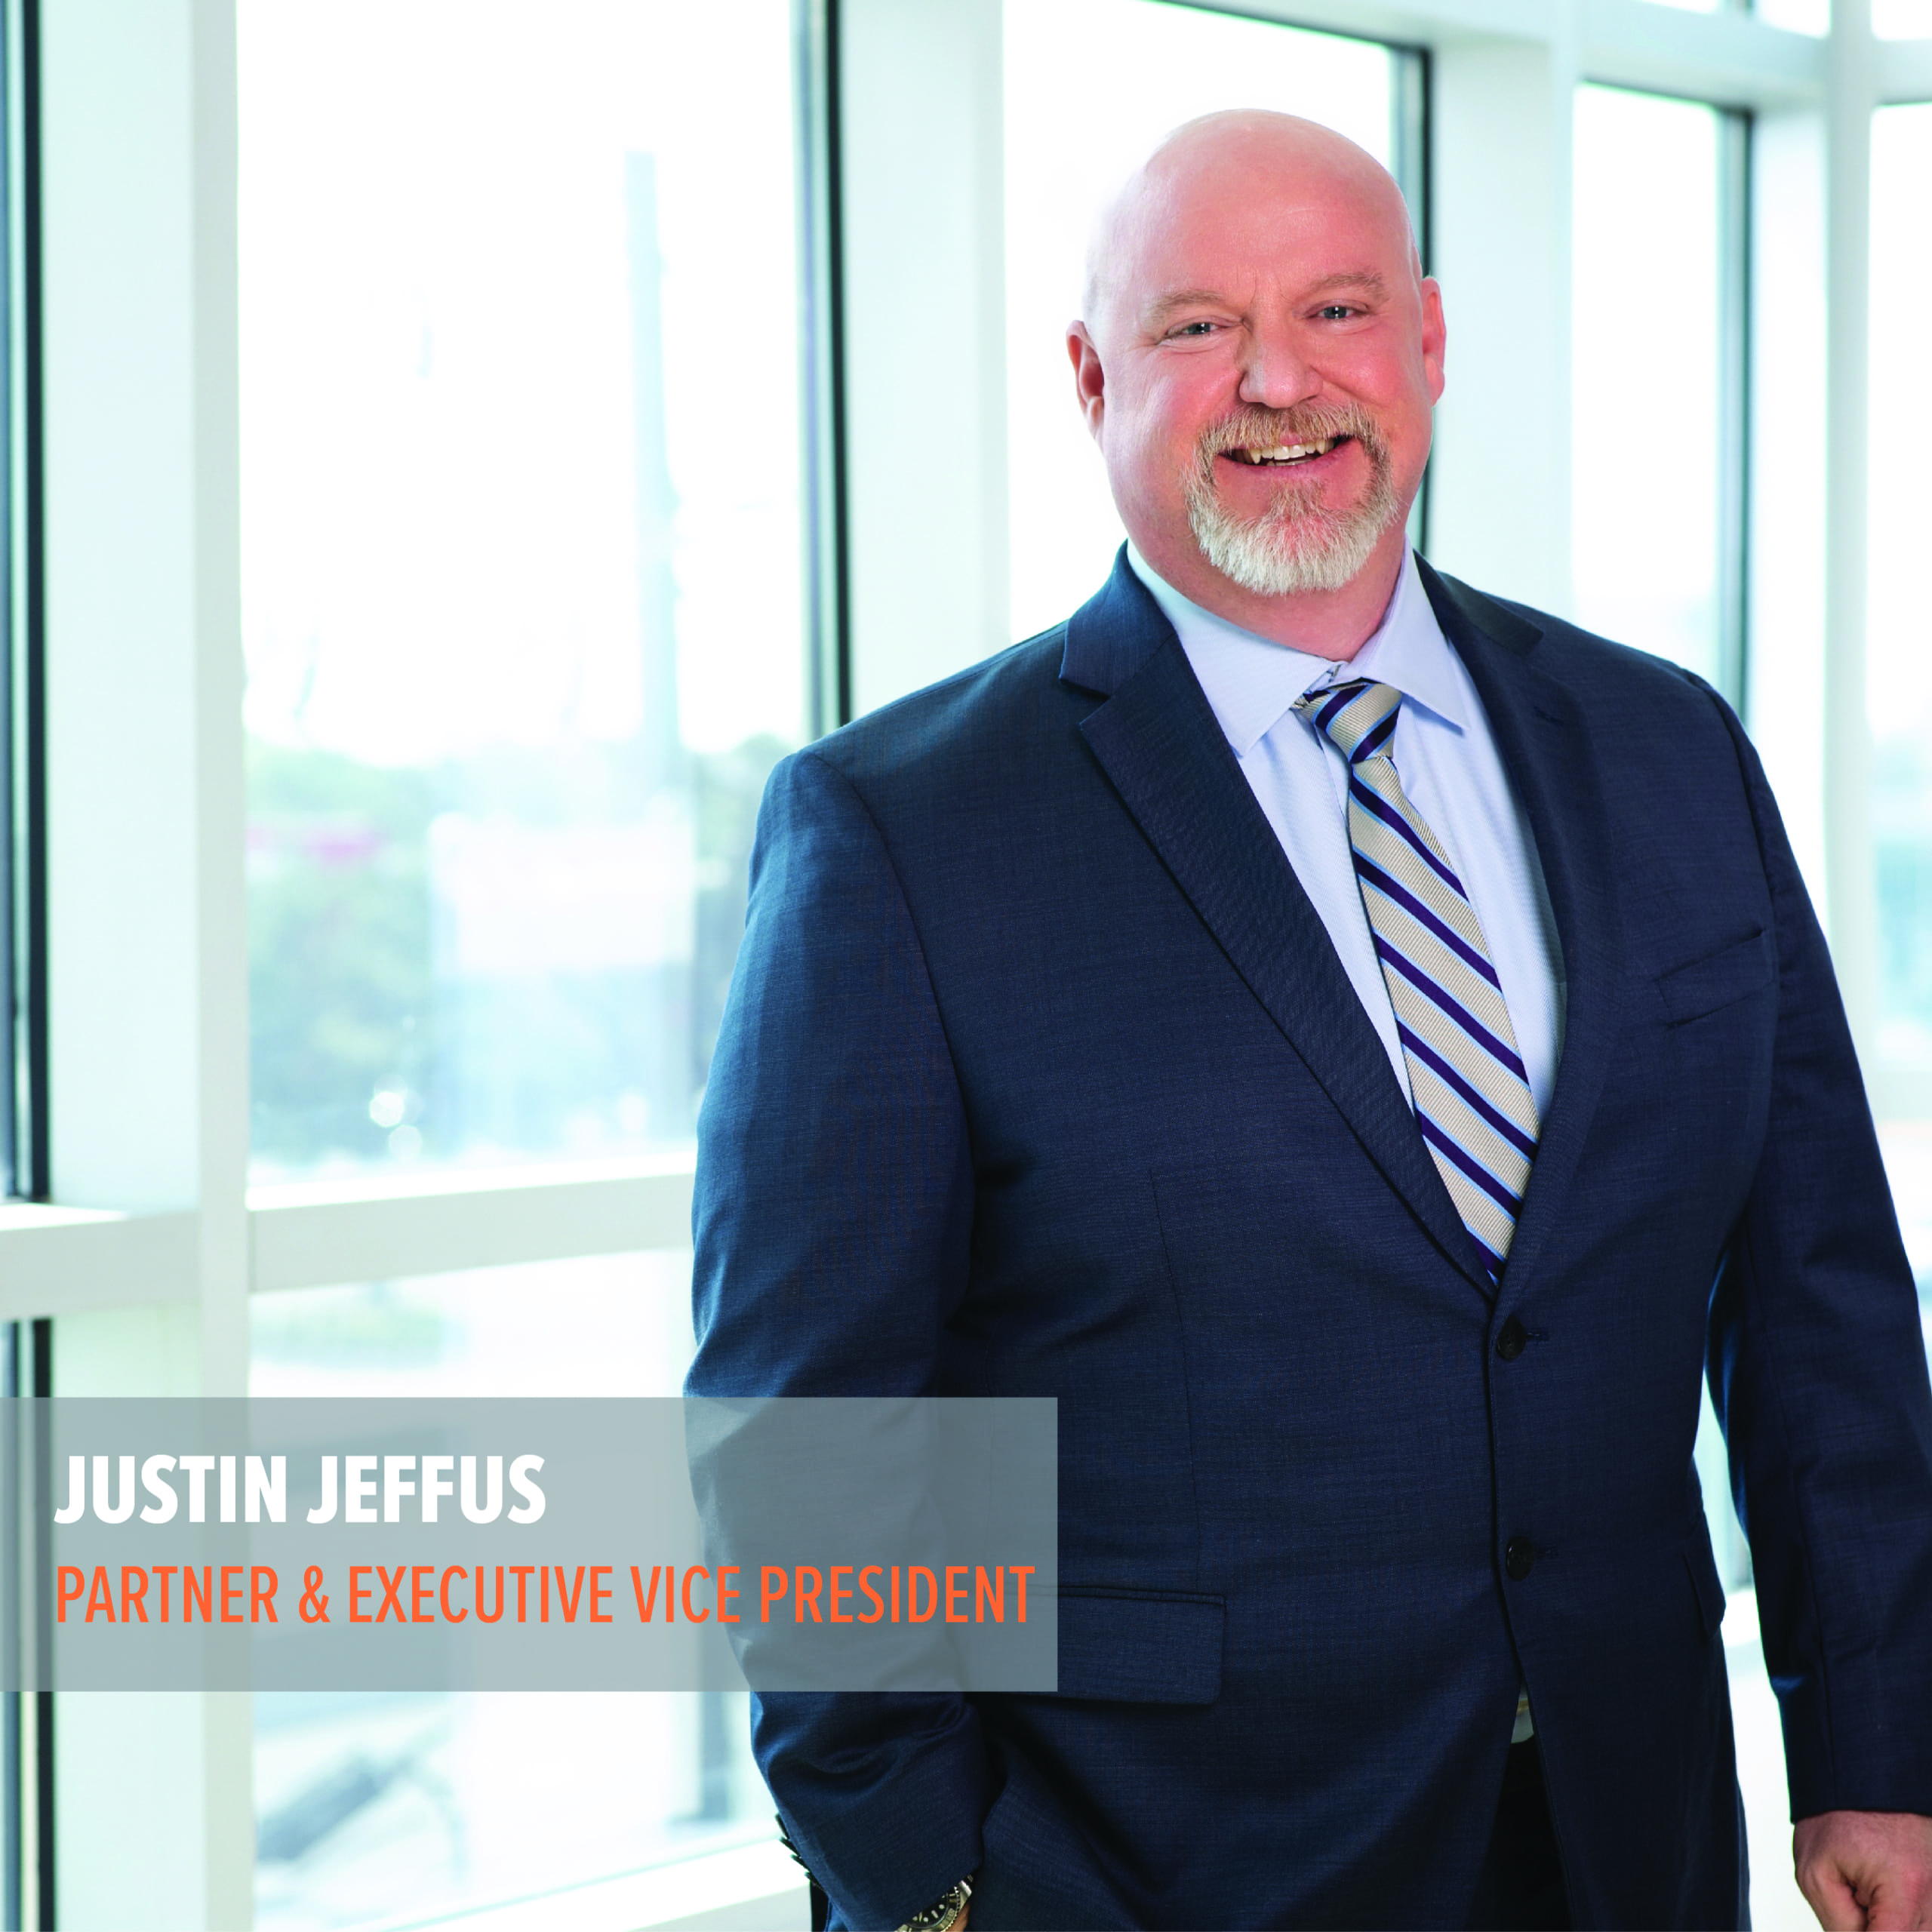 A professional portrait of a smiling executive man standing by the window, dressed in a suit with his name and title displayed as "justin jeffus, partner & executive vice president.